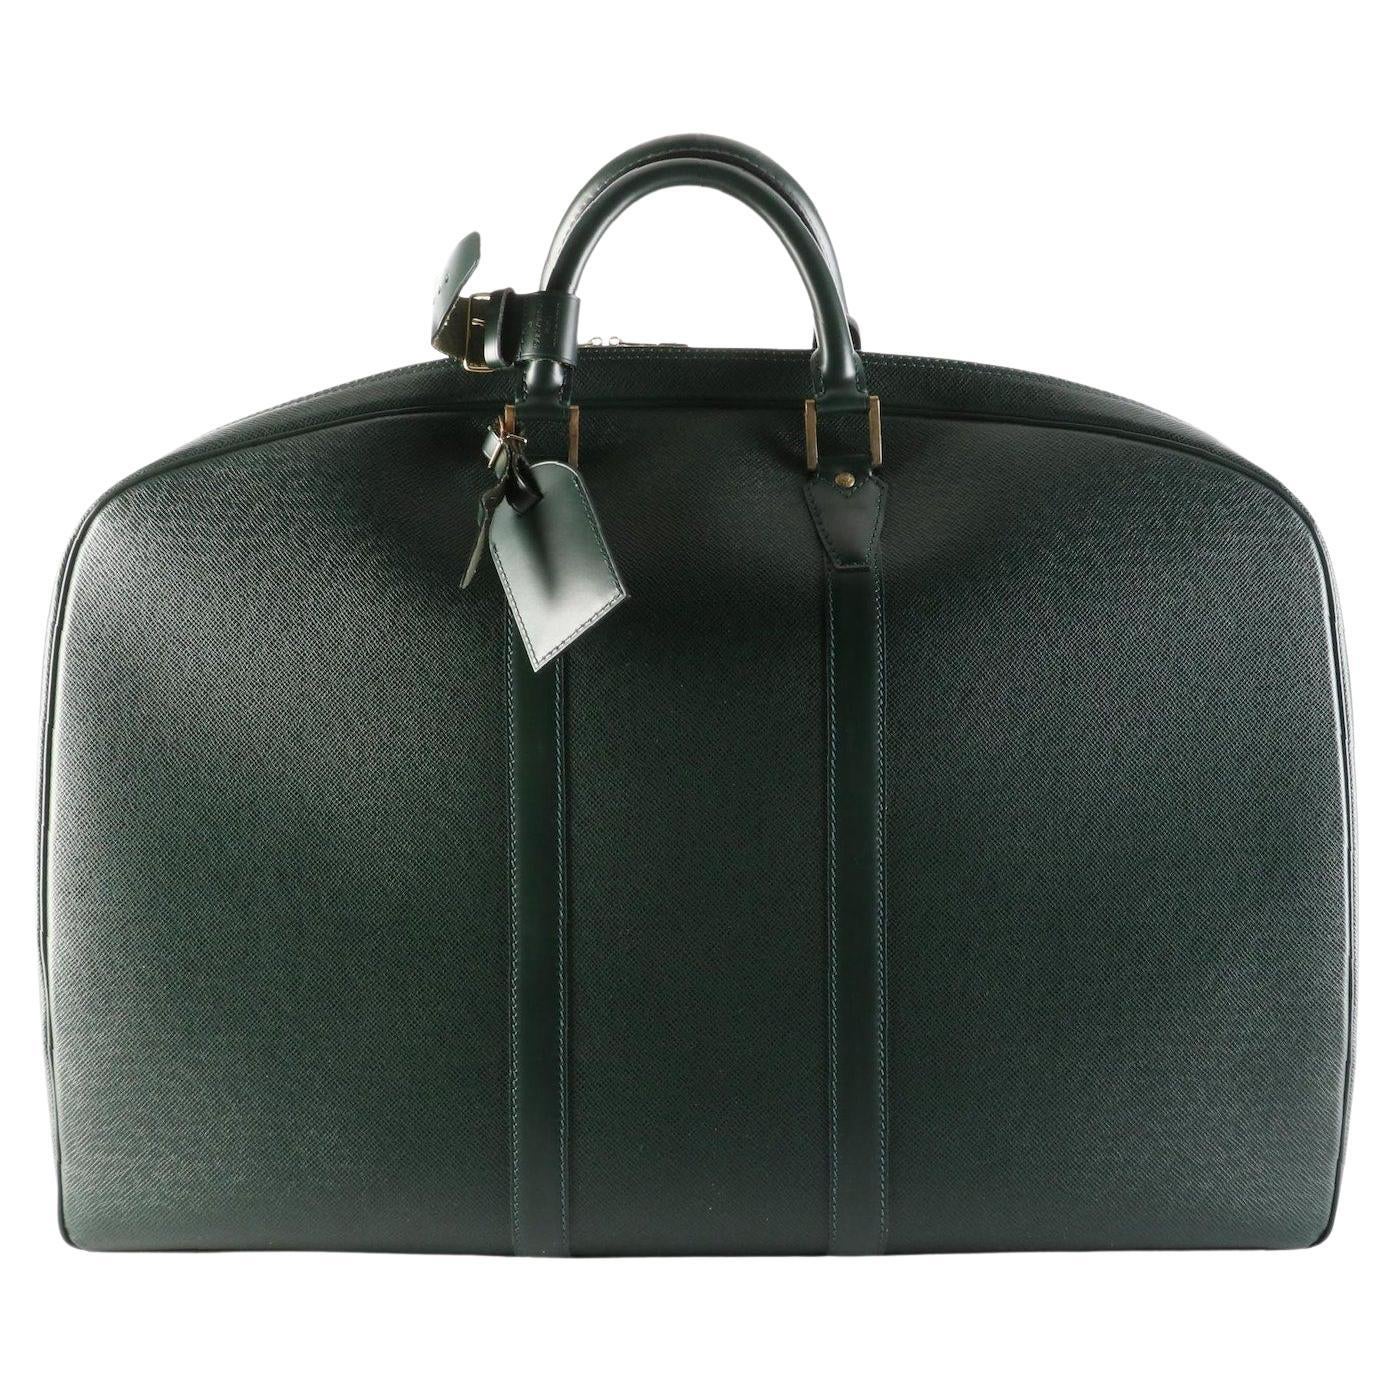 1998 Shockingly New! Louis Vuitton Kendall GM Travel Bag in Épicéa Taïga Leather For Sale